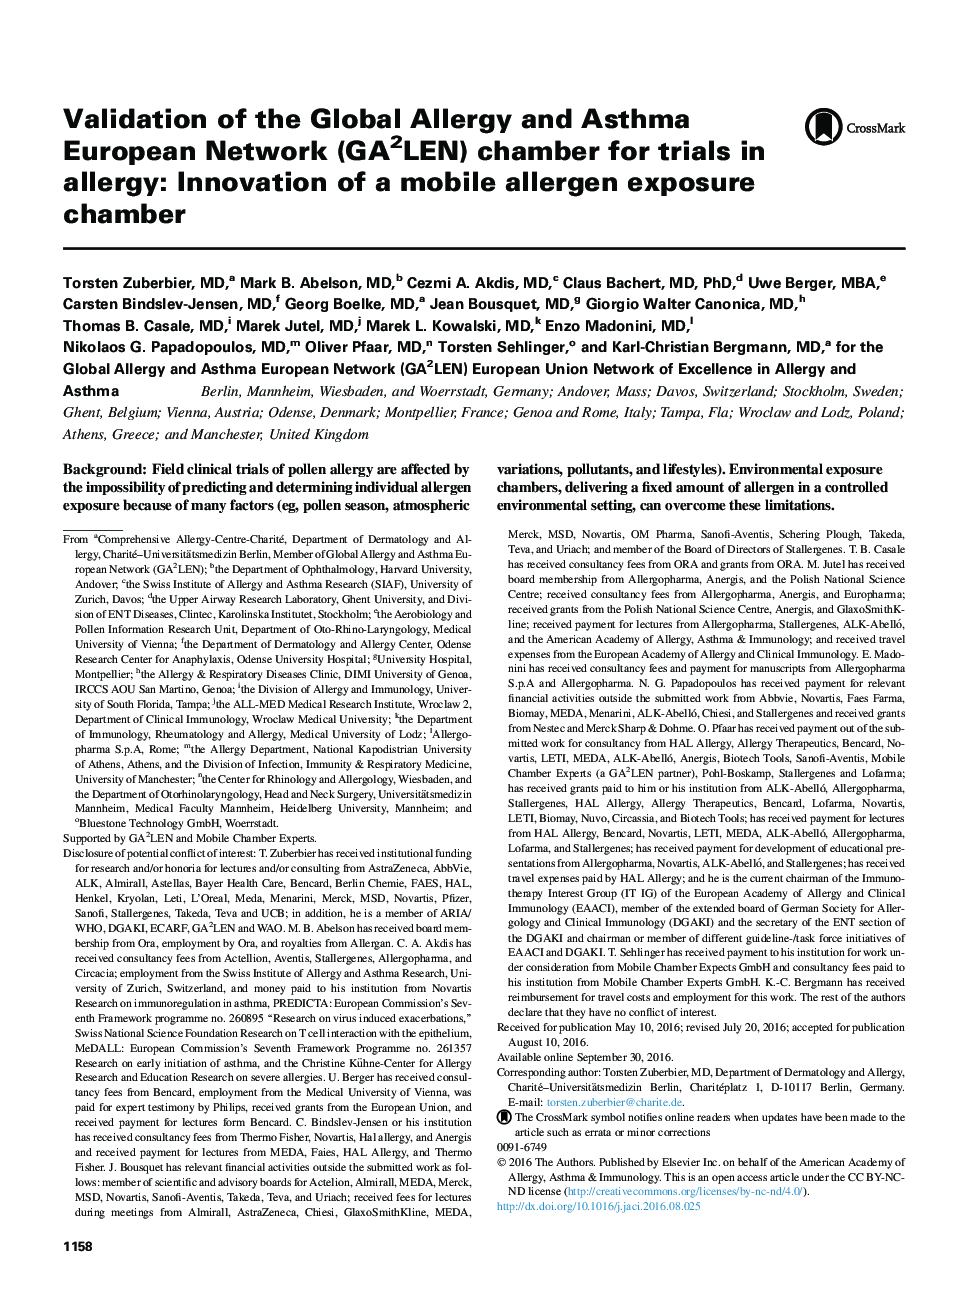 Validation of the Global Allergy and Asthma European Network (GA2LEN) chamber for trials in allergy: Innovation of a mobile allergen exposure chamber